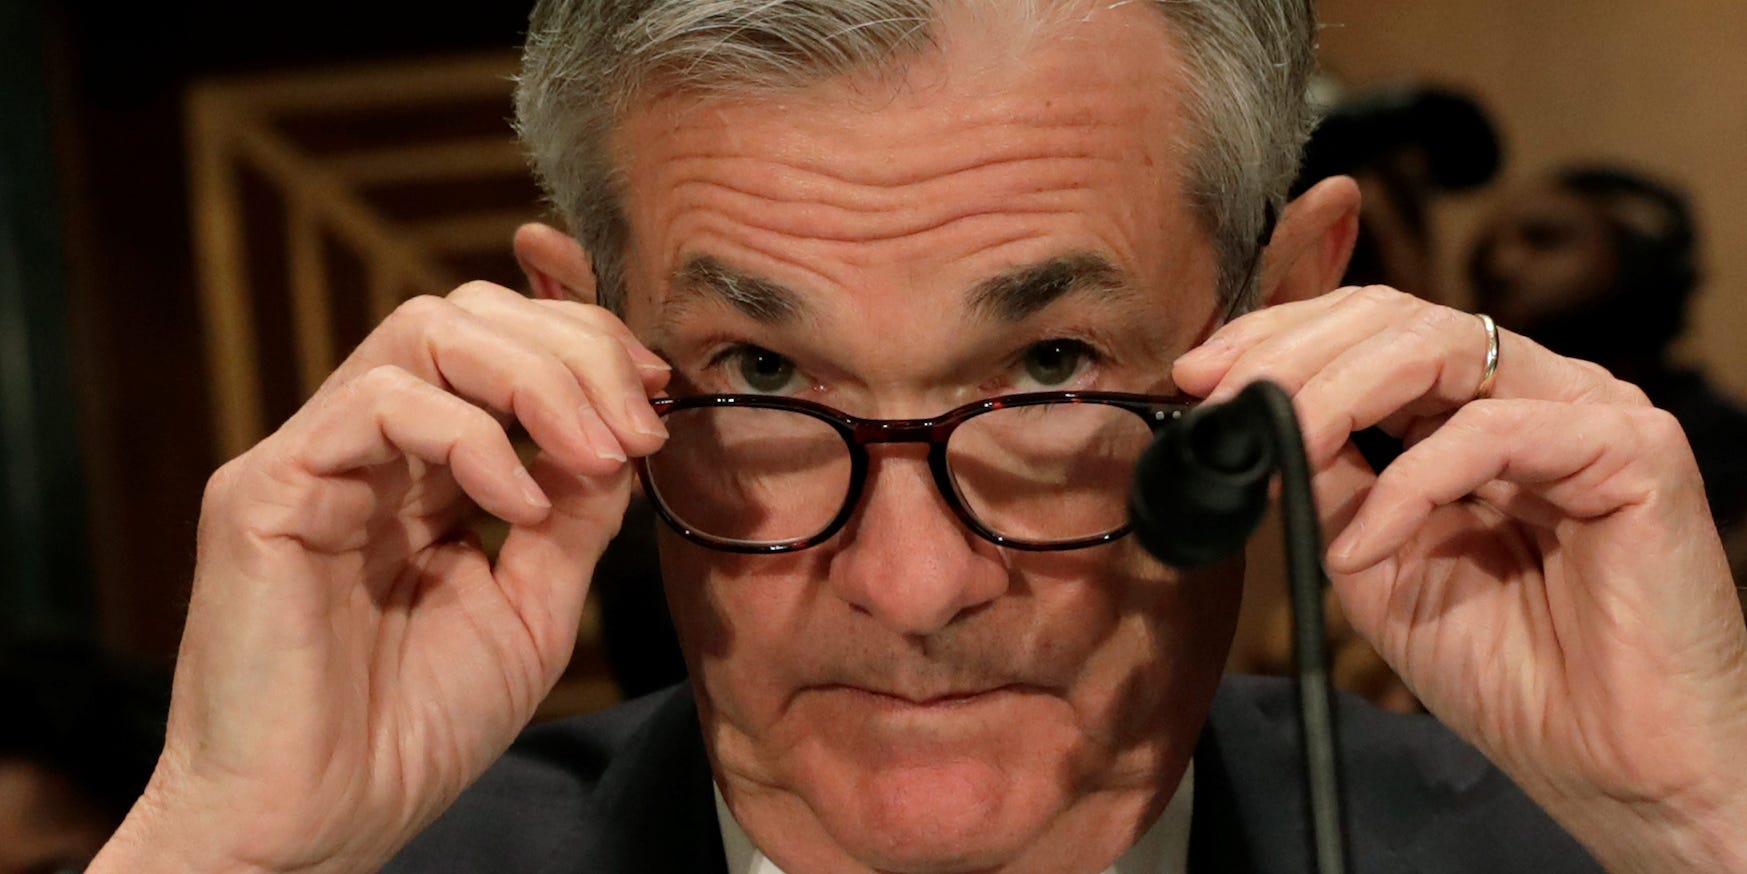 pricey stocks and homes, shaky banks, office turmoil, and people's debt woes are all worrying the fed